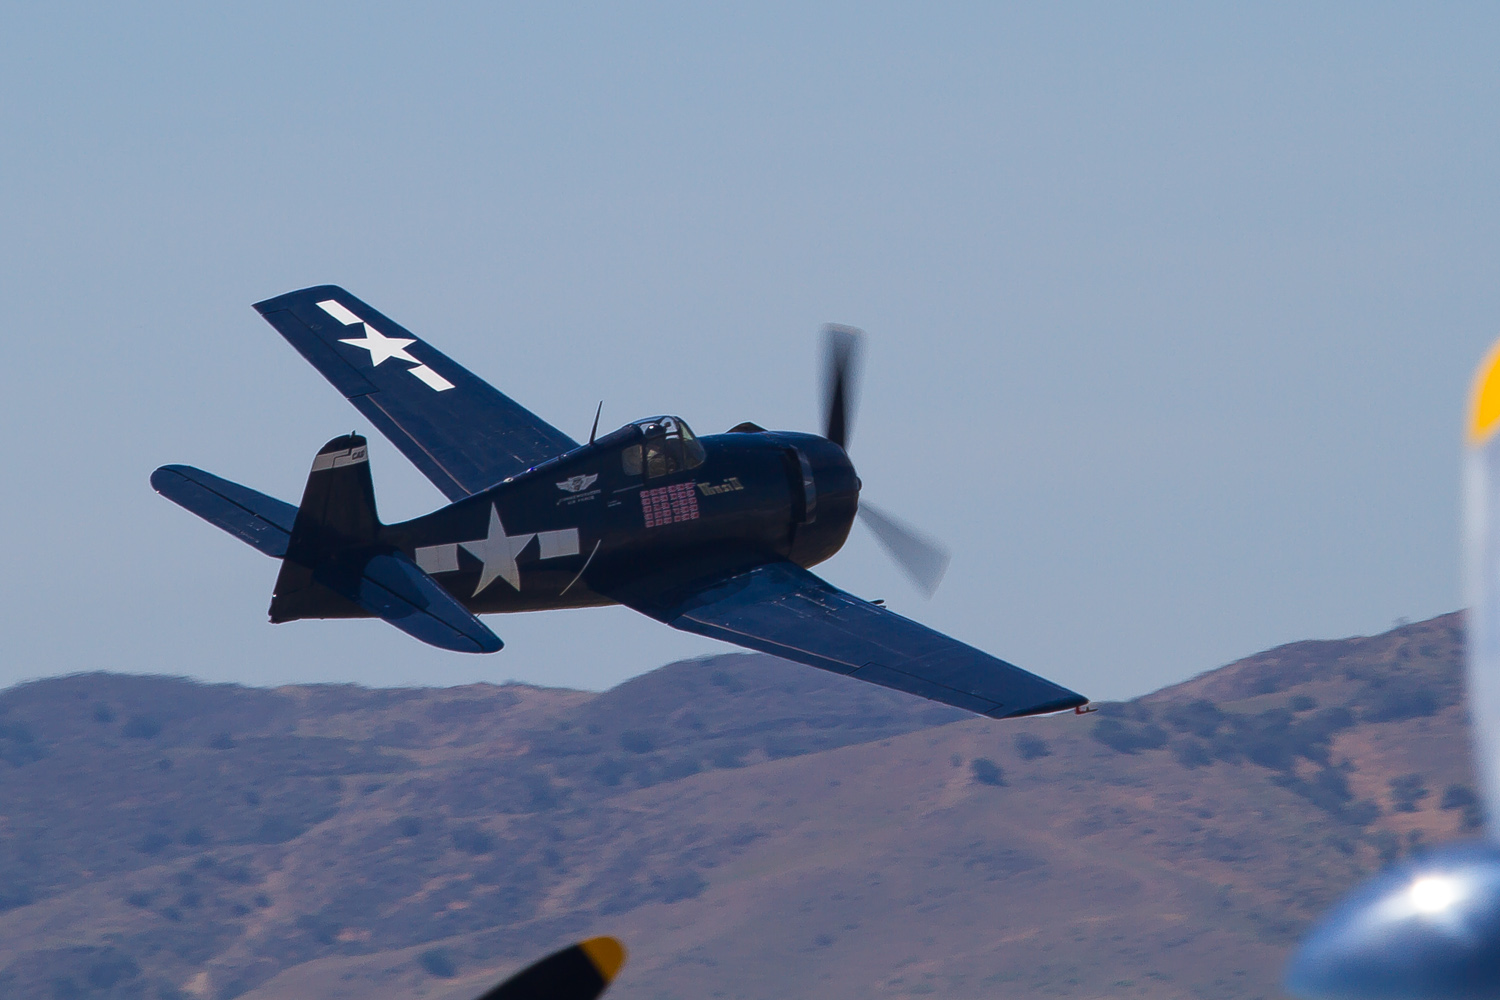 Plane of Fame Airshow 2014